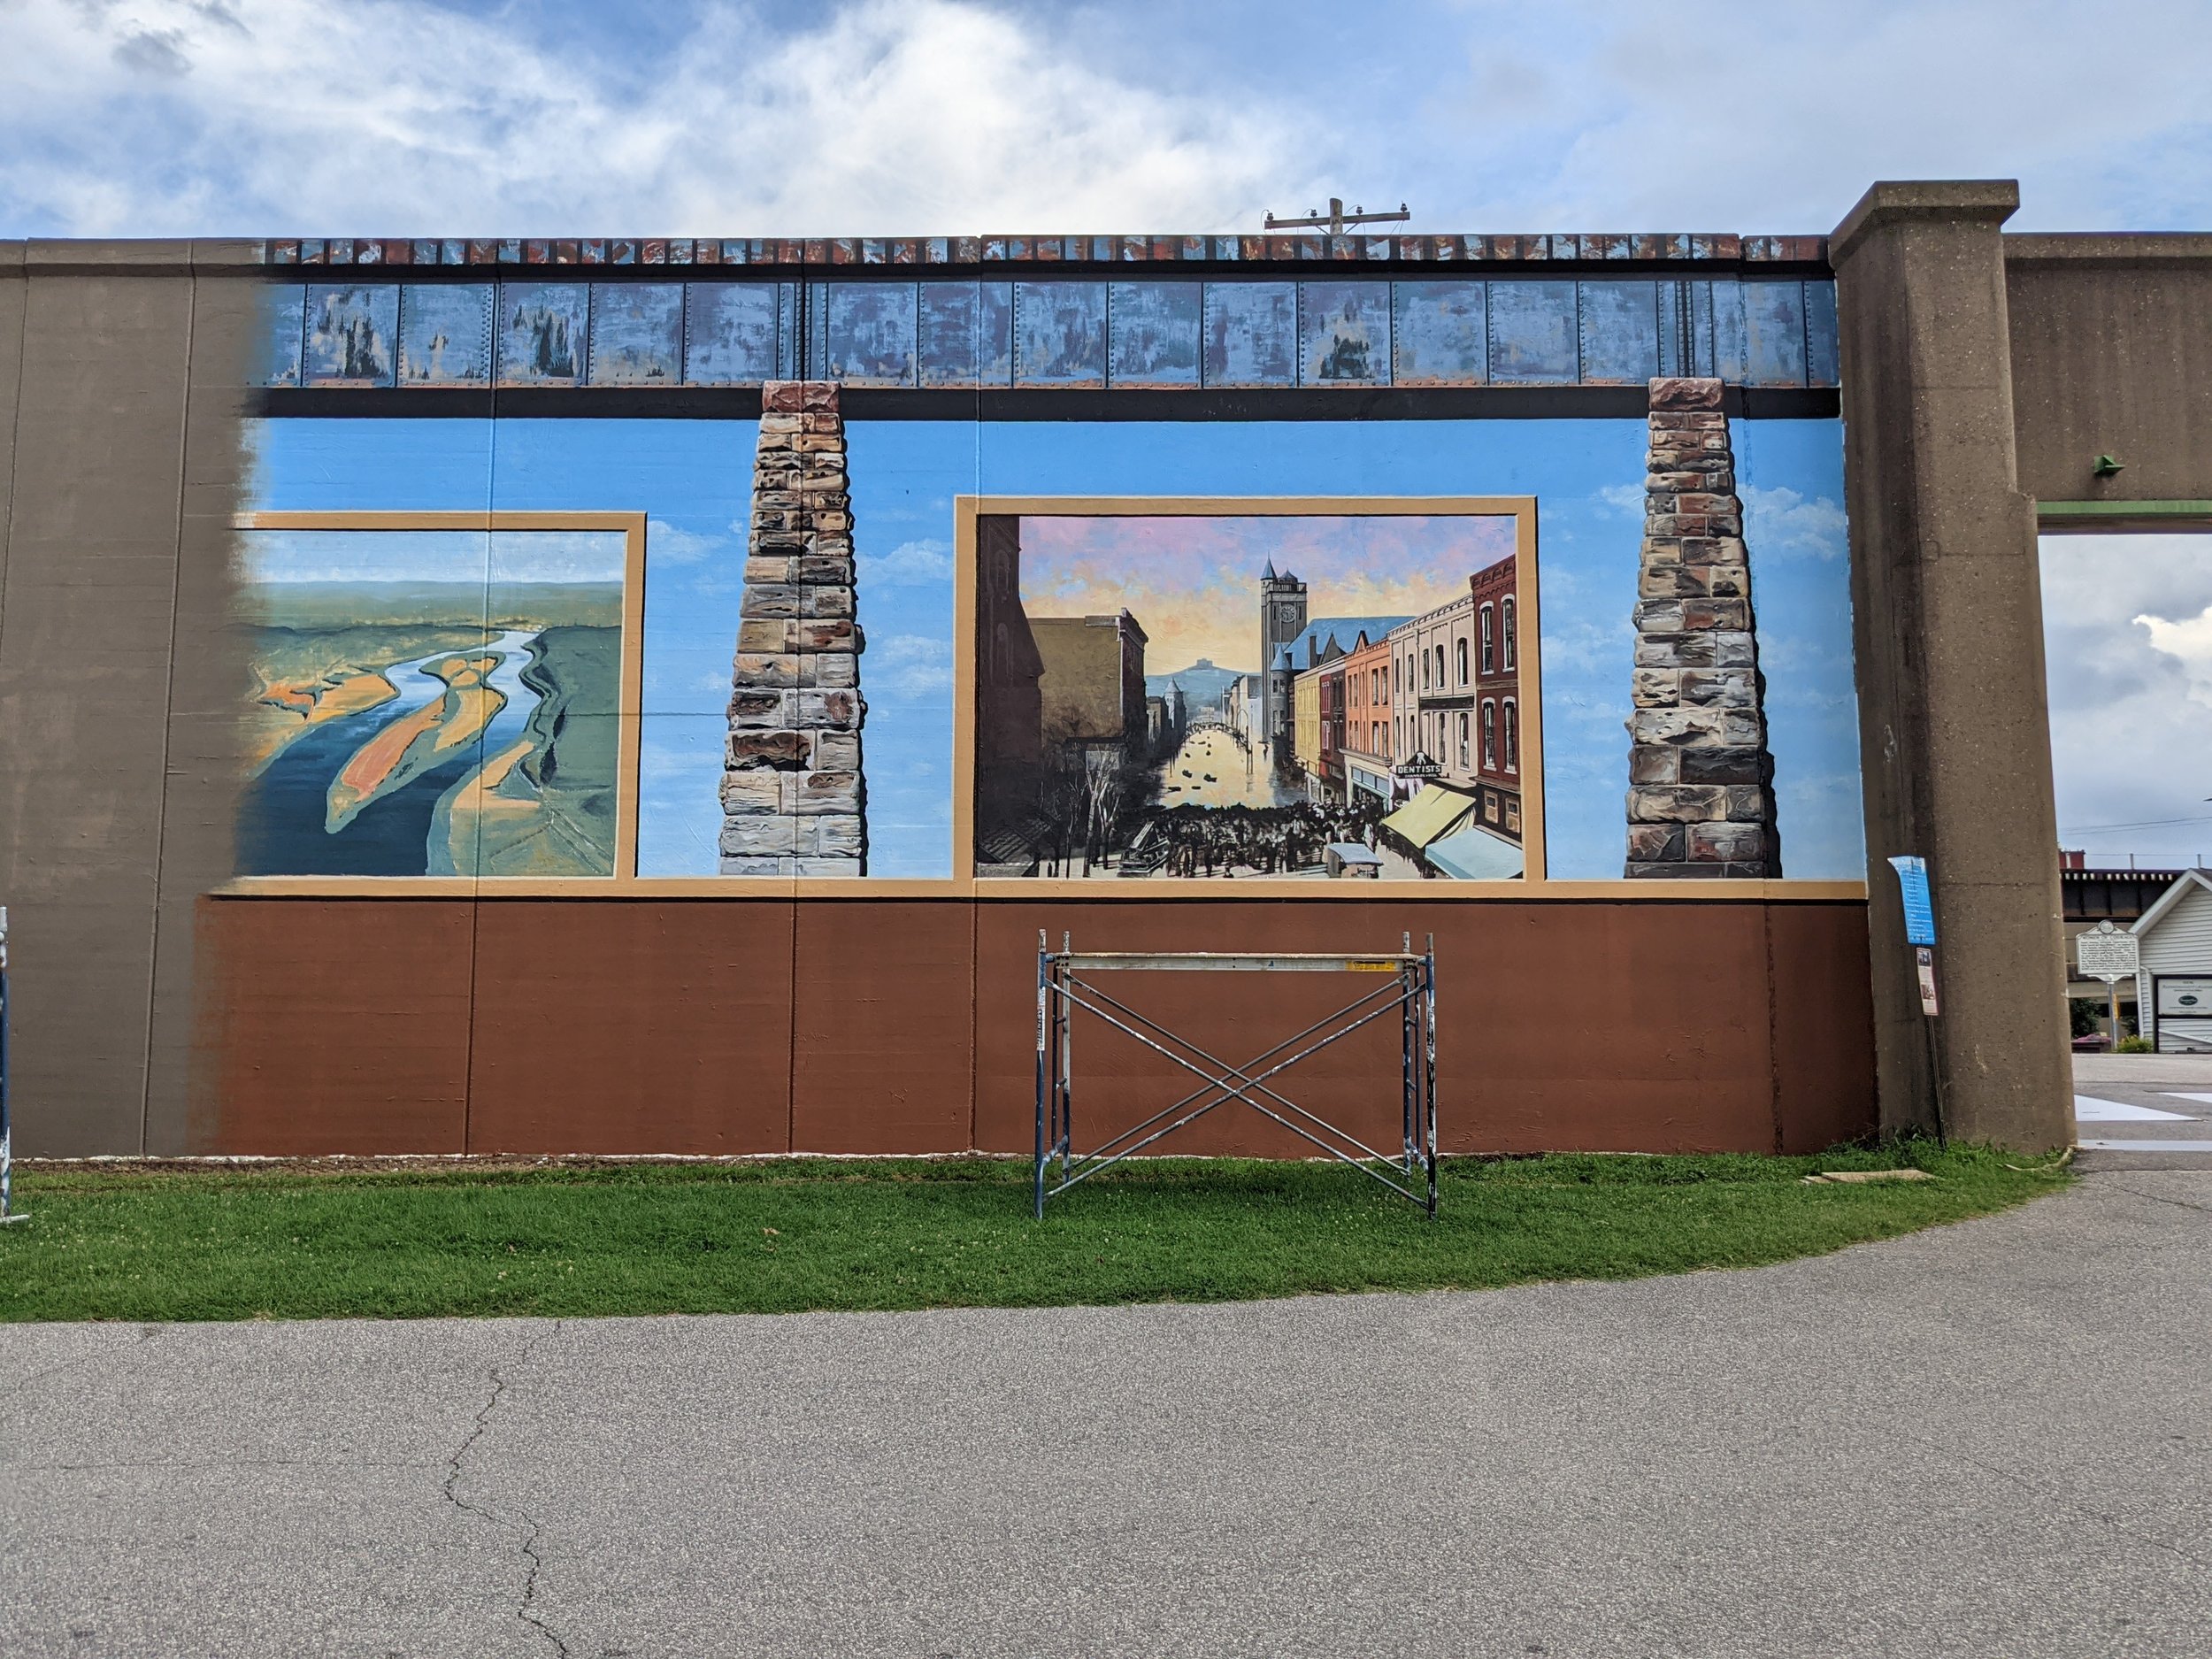 Parkersburg Flood Wall Mural, Phase 2